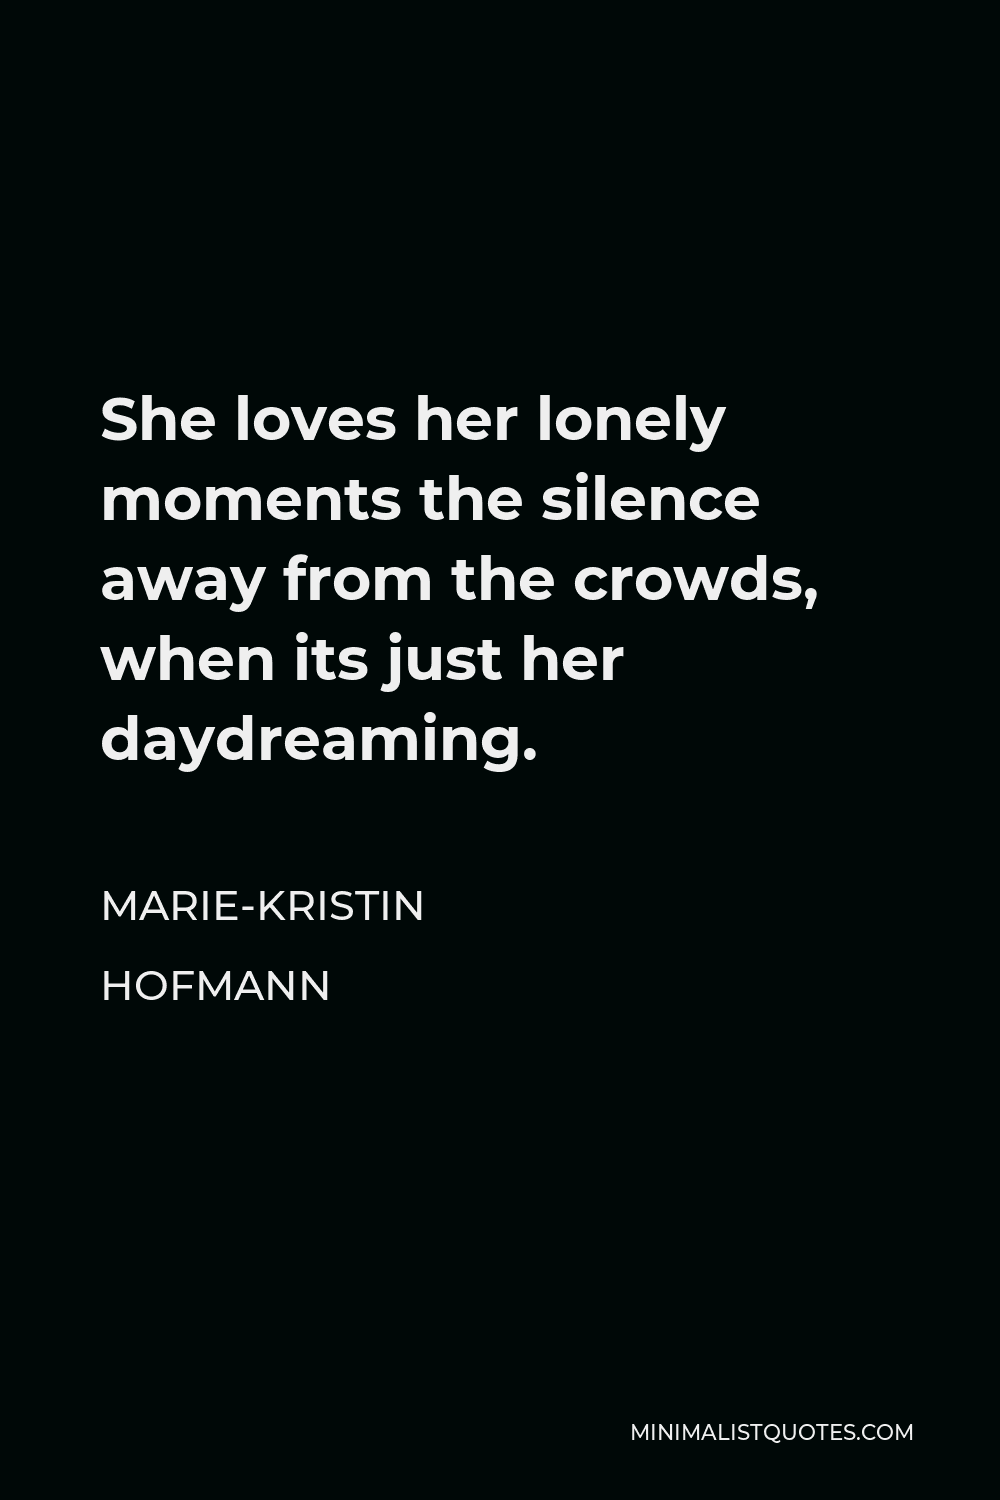 Marie-Kristin Hofmann Quote - She loves her lonely moments the silence away from the crowds, when its just her daydreaming.